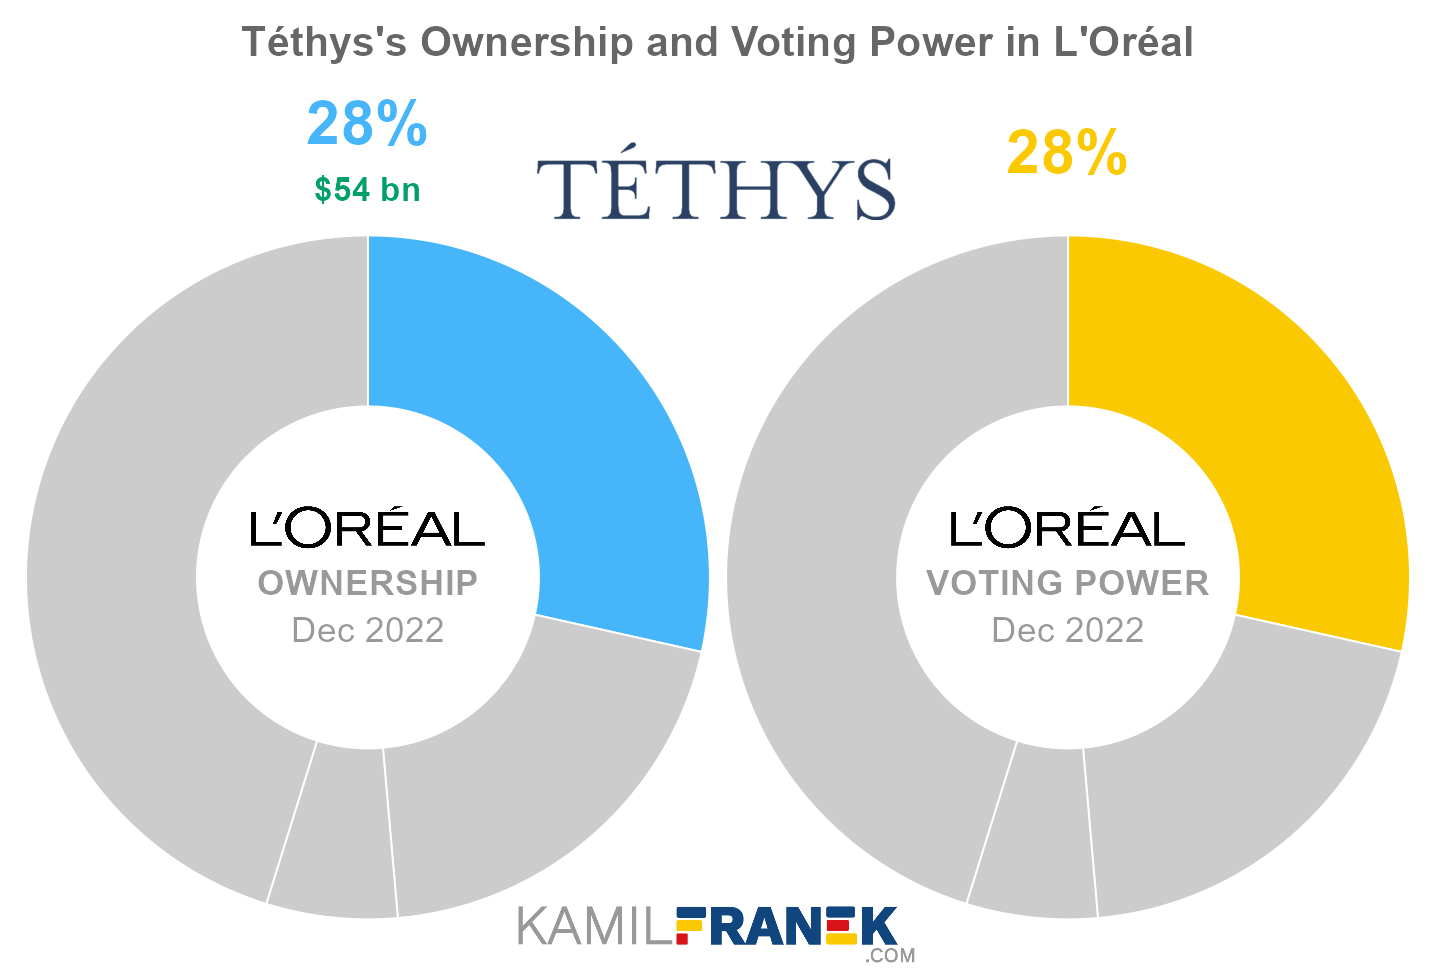 Téthys's share ownership and voting power in L'Oréal (chart)